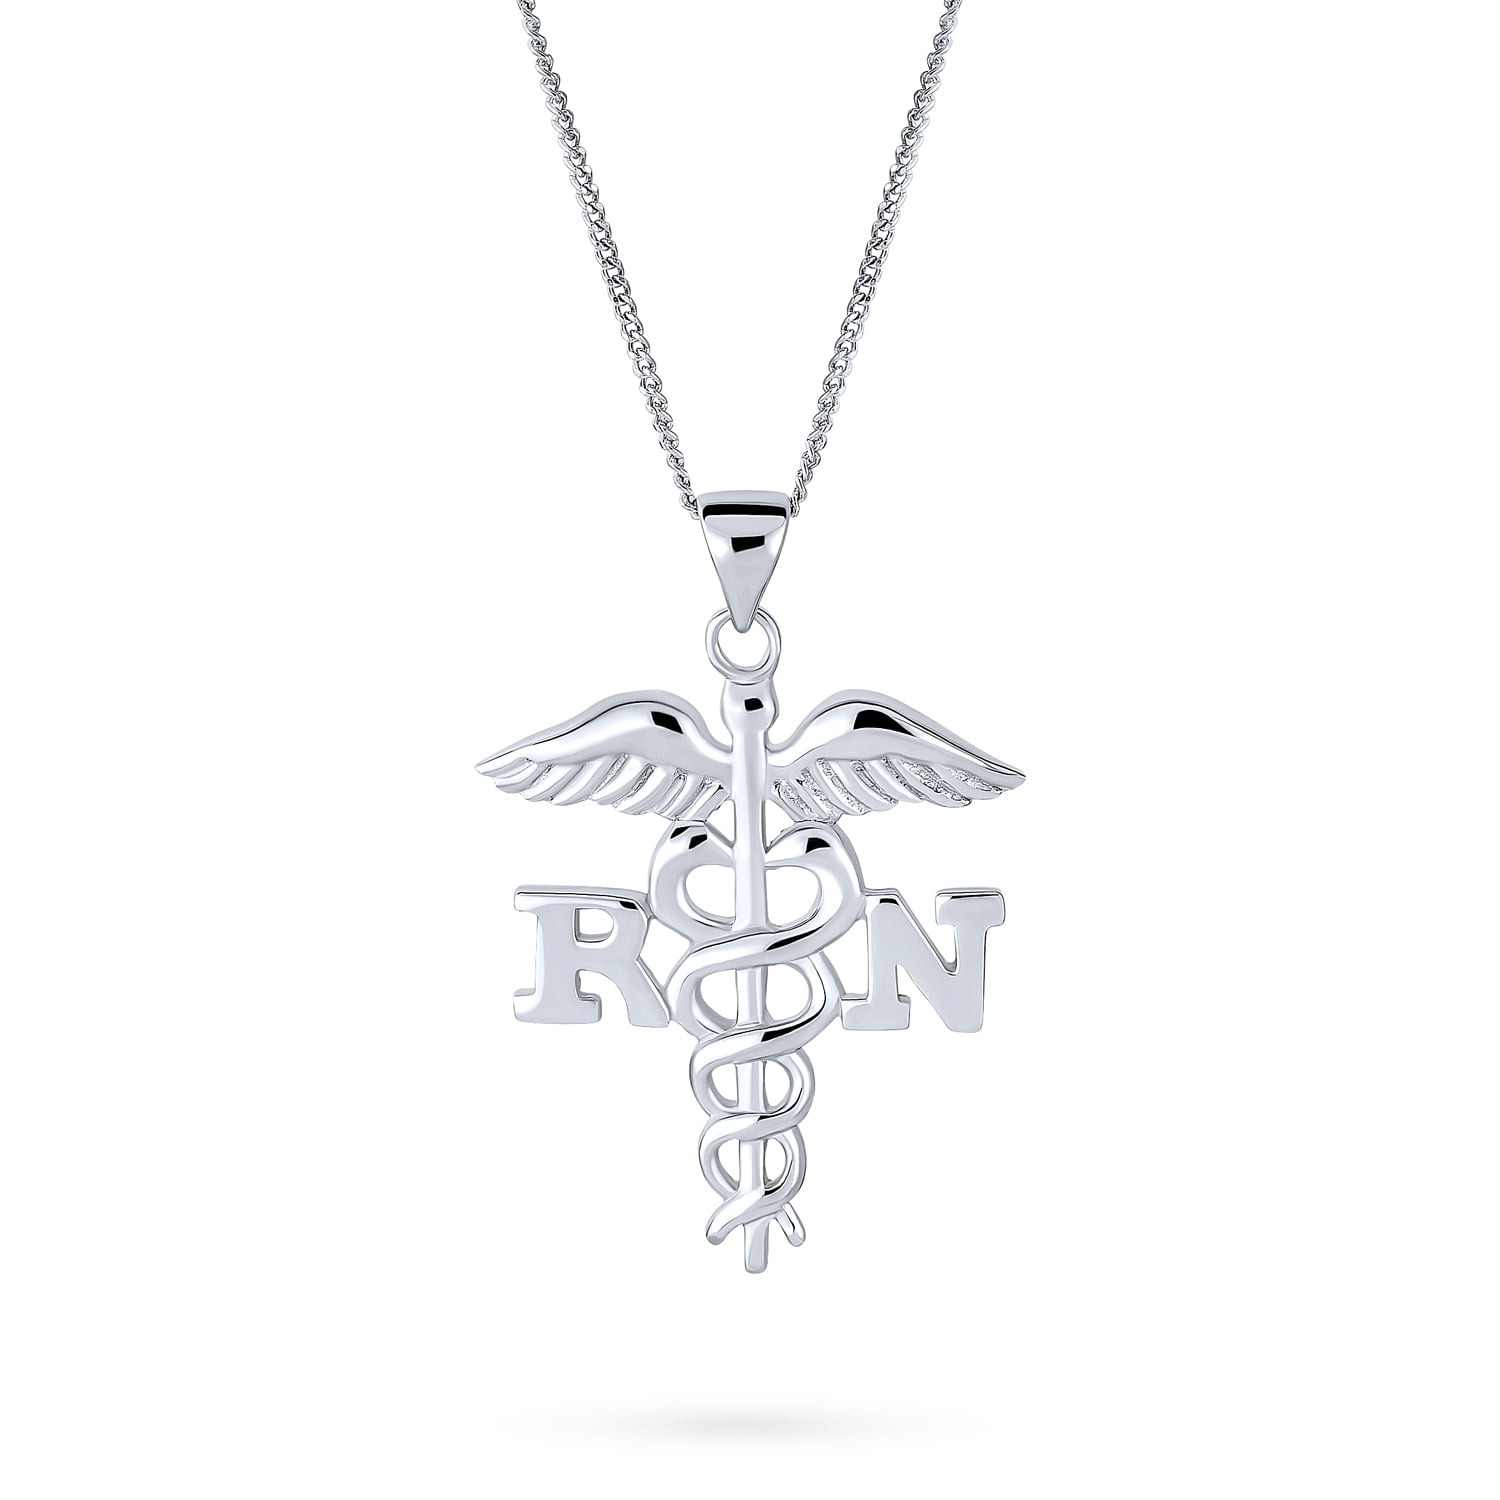 Women Fashion Crystal letter Heart Nurse Pendant Necklace Chain Family Gifts 